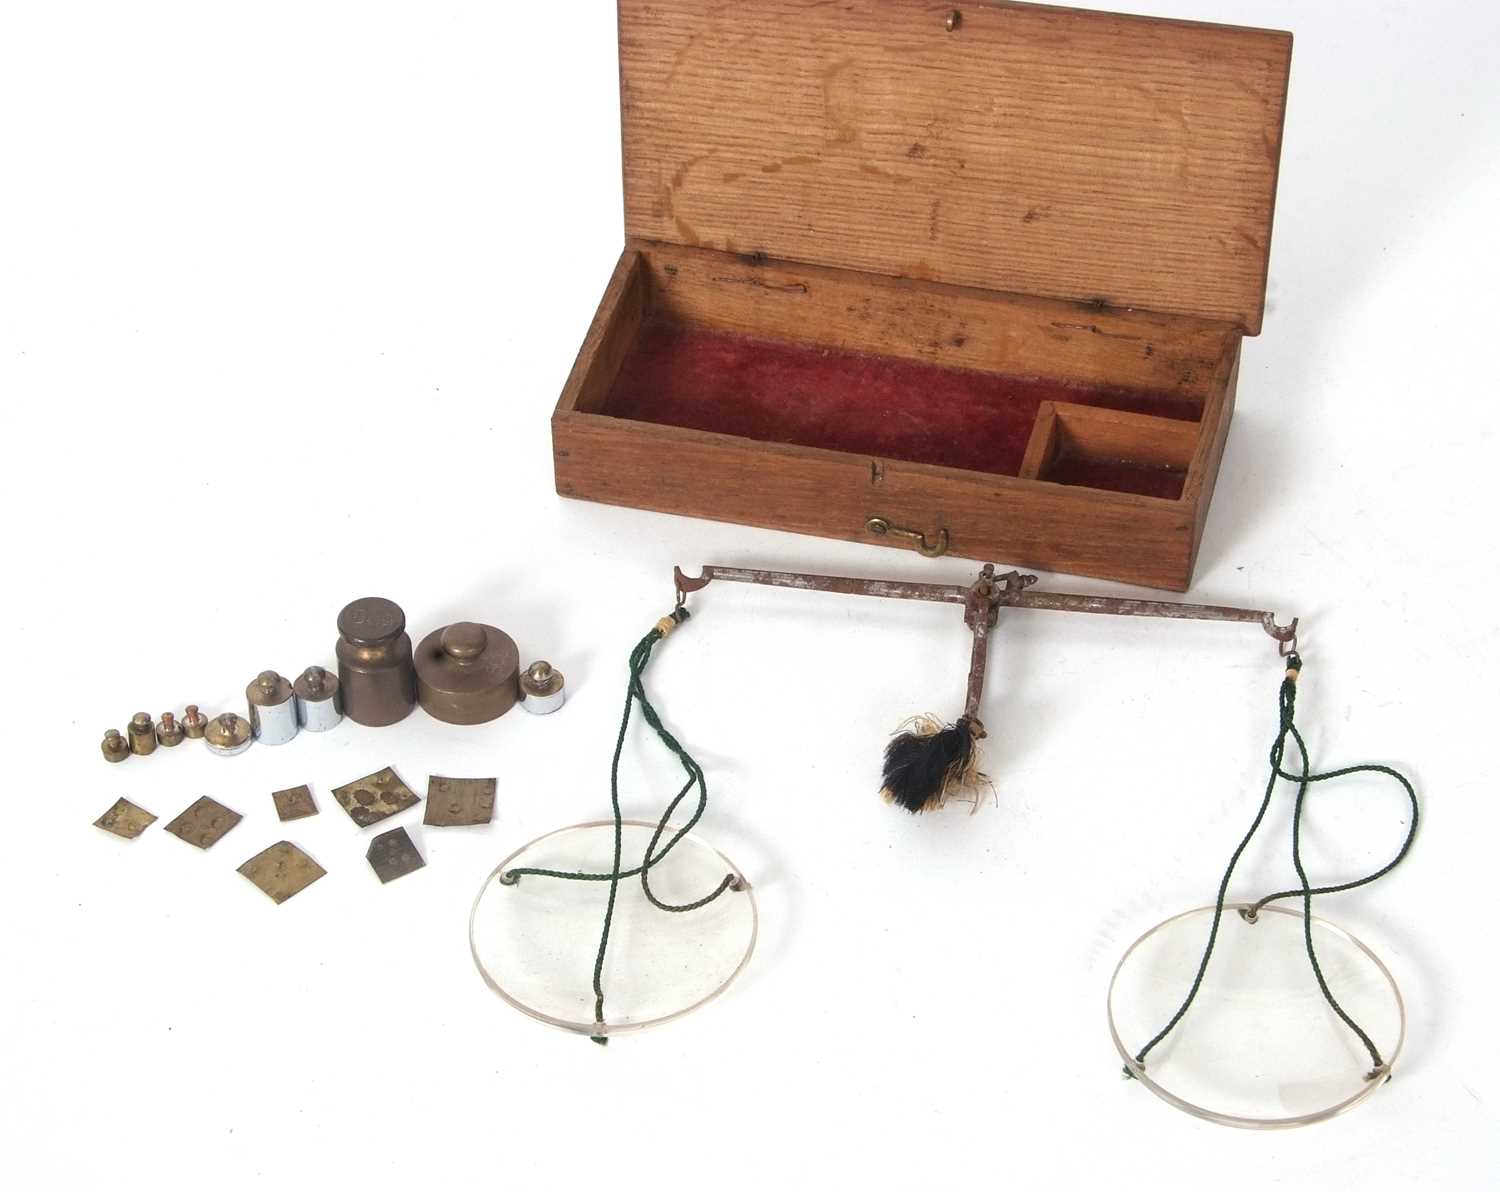 Box set of apothecary scales with glass pans, strings and weights and balance beams - Image 4 of 4